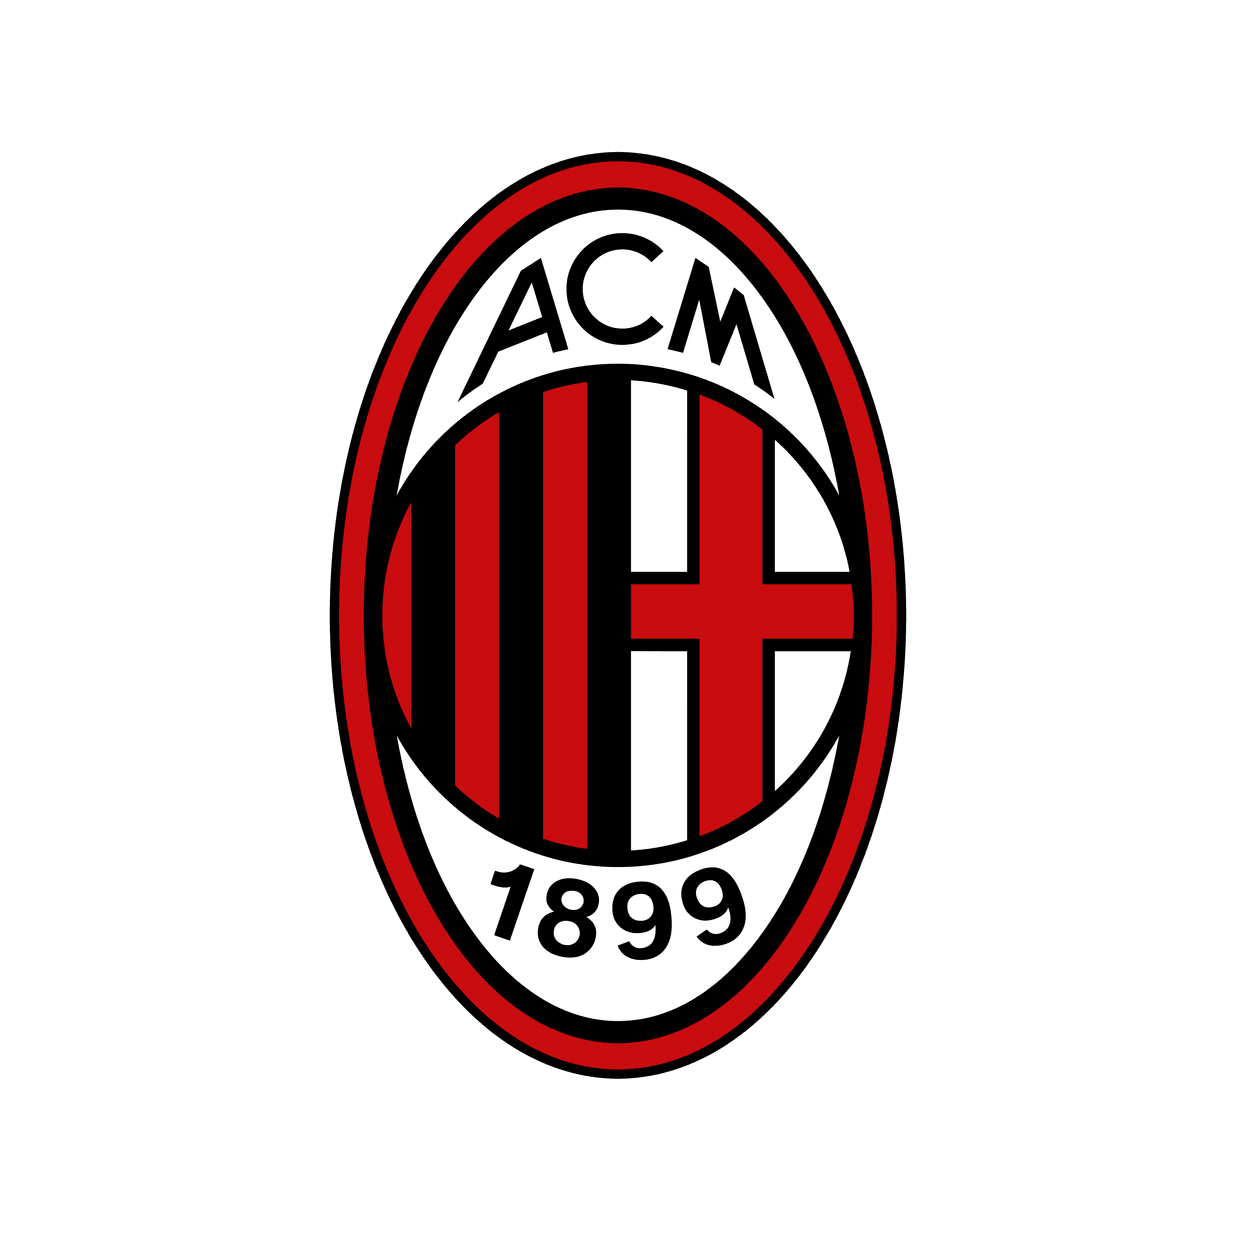 Book your AC Milan tickets today and join the fervent crowd at San Siro!